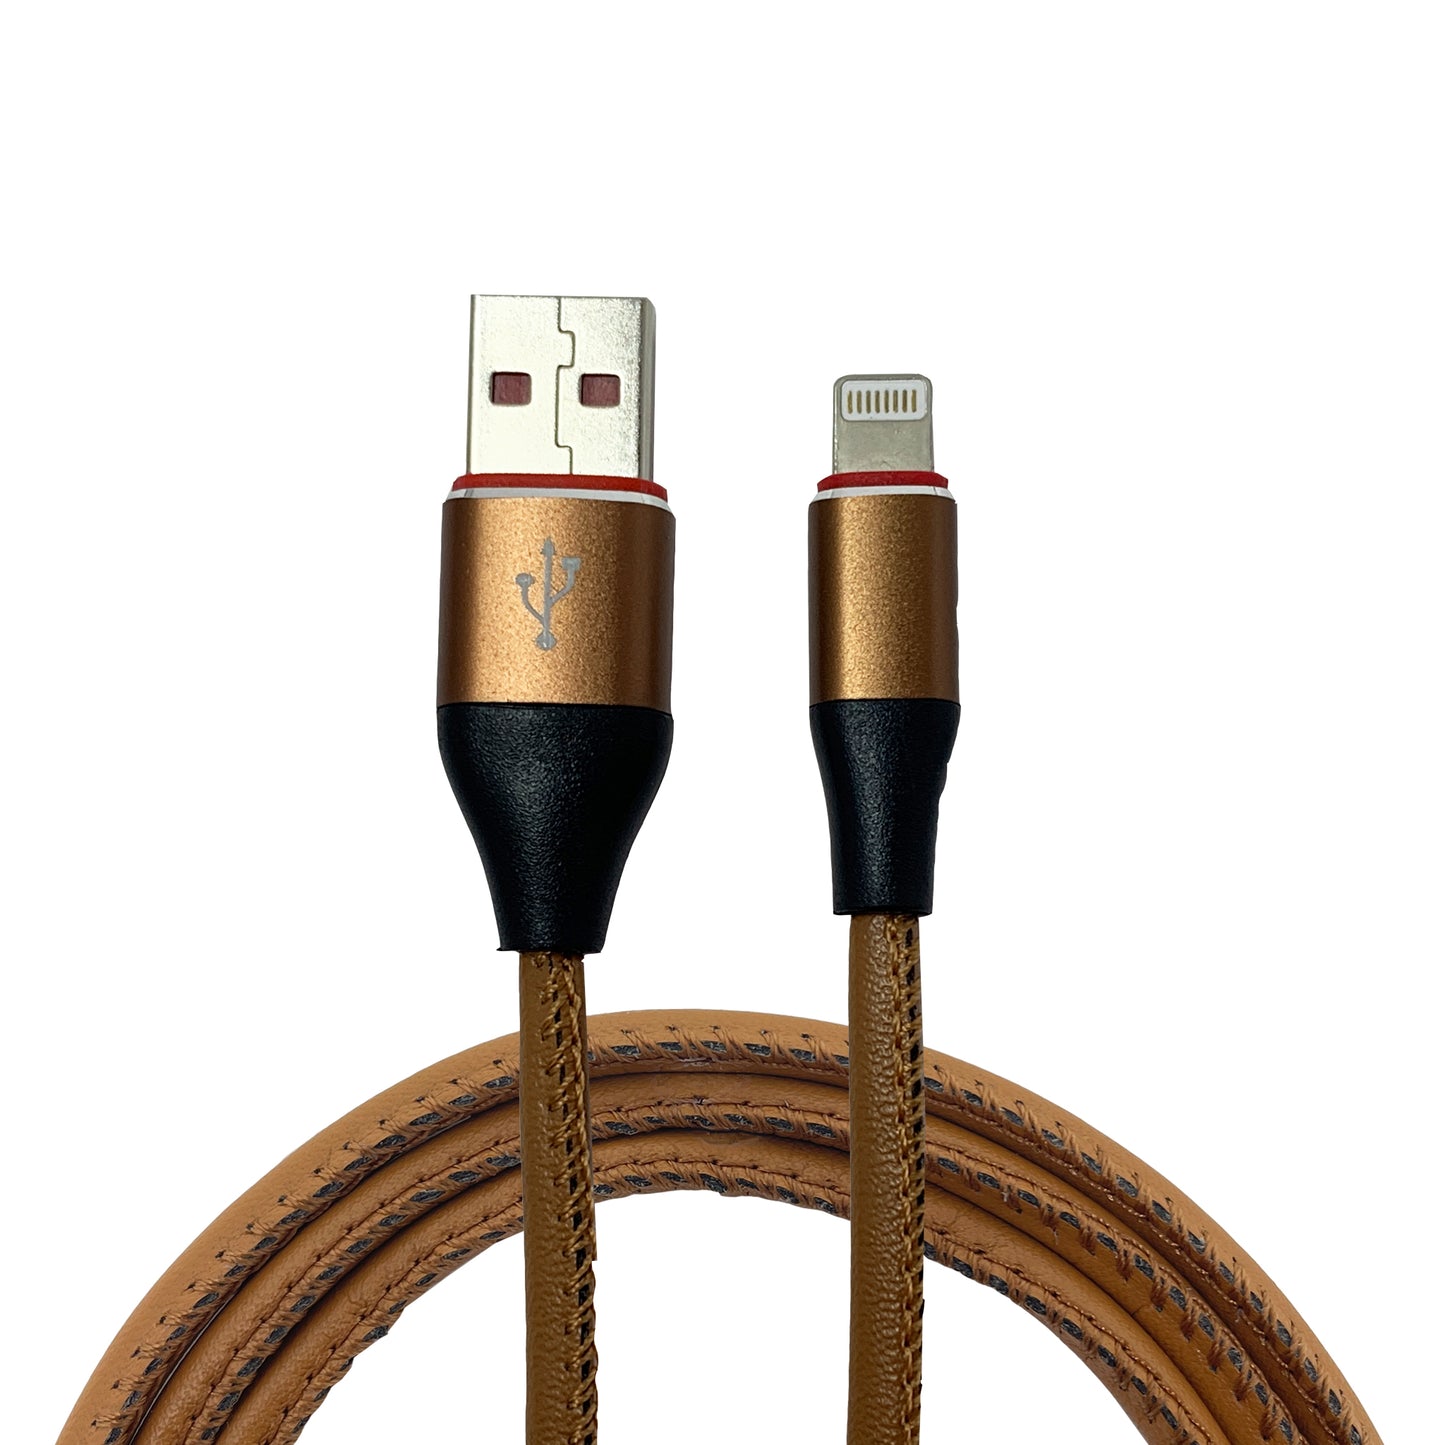 [MOTTO] Leather Wrapped Lightning iPhone Cable